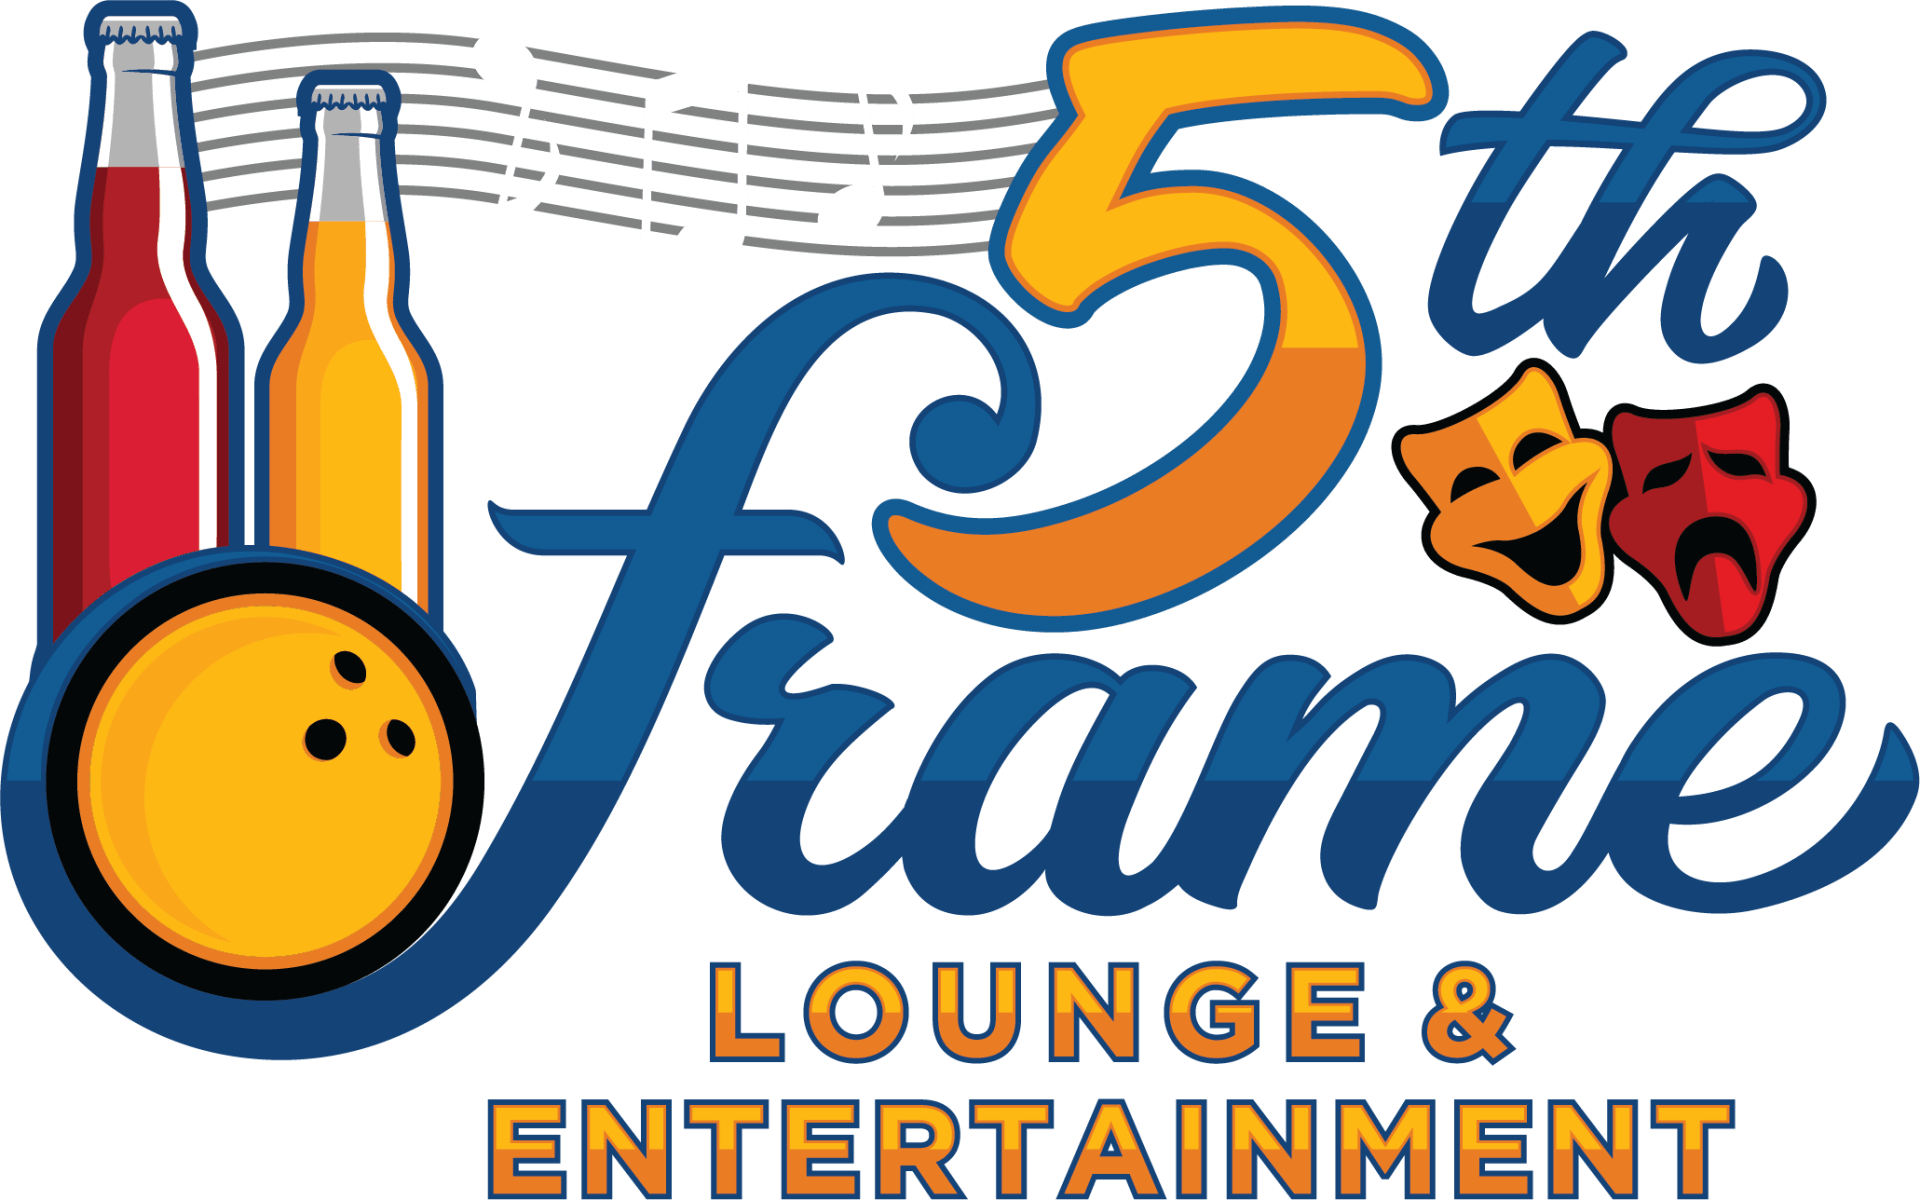 A logo for the 5th frame lounge and entertainment